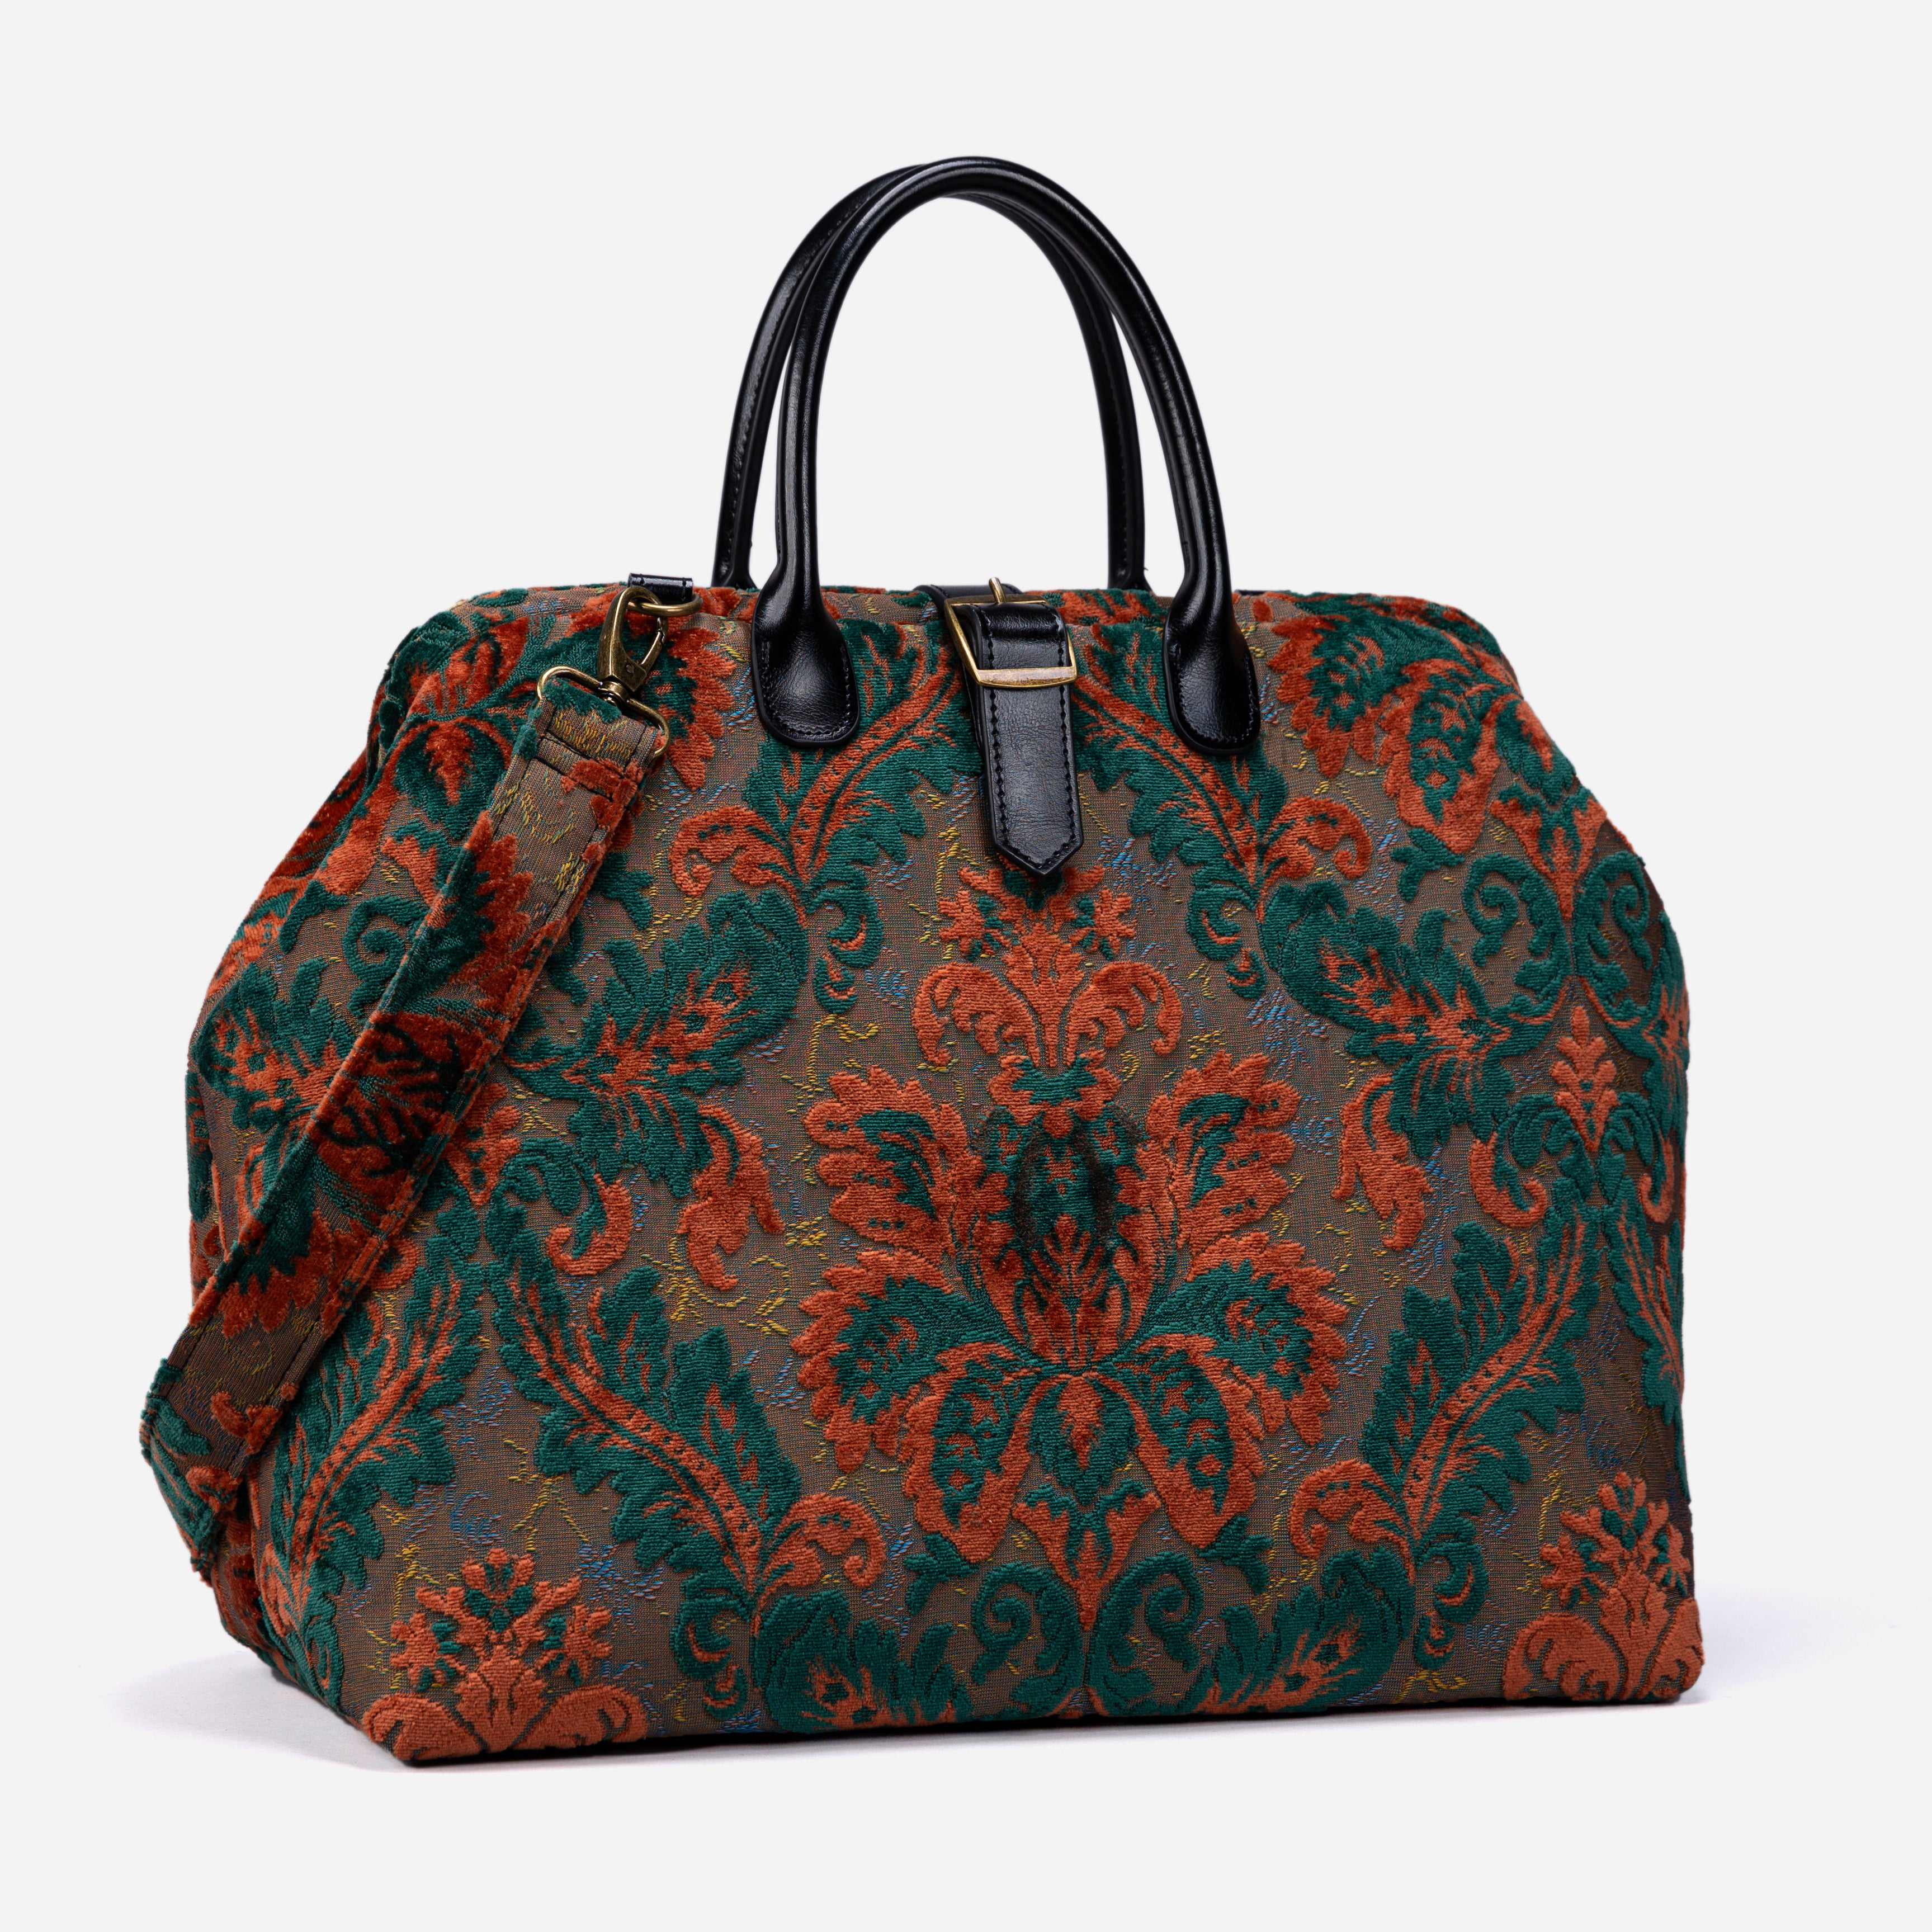 Mary Poppins Carpetbag Revival Jade weekender overview